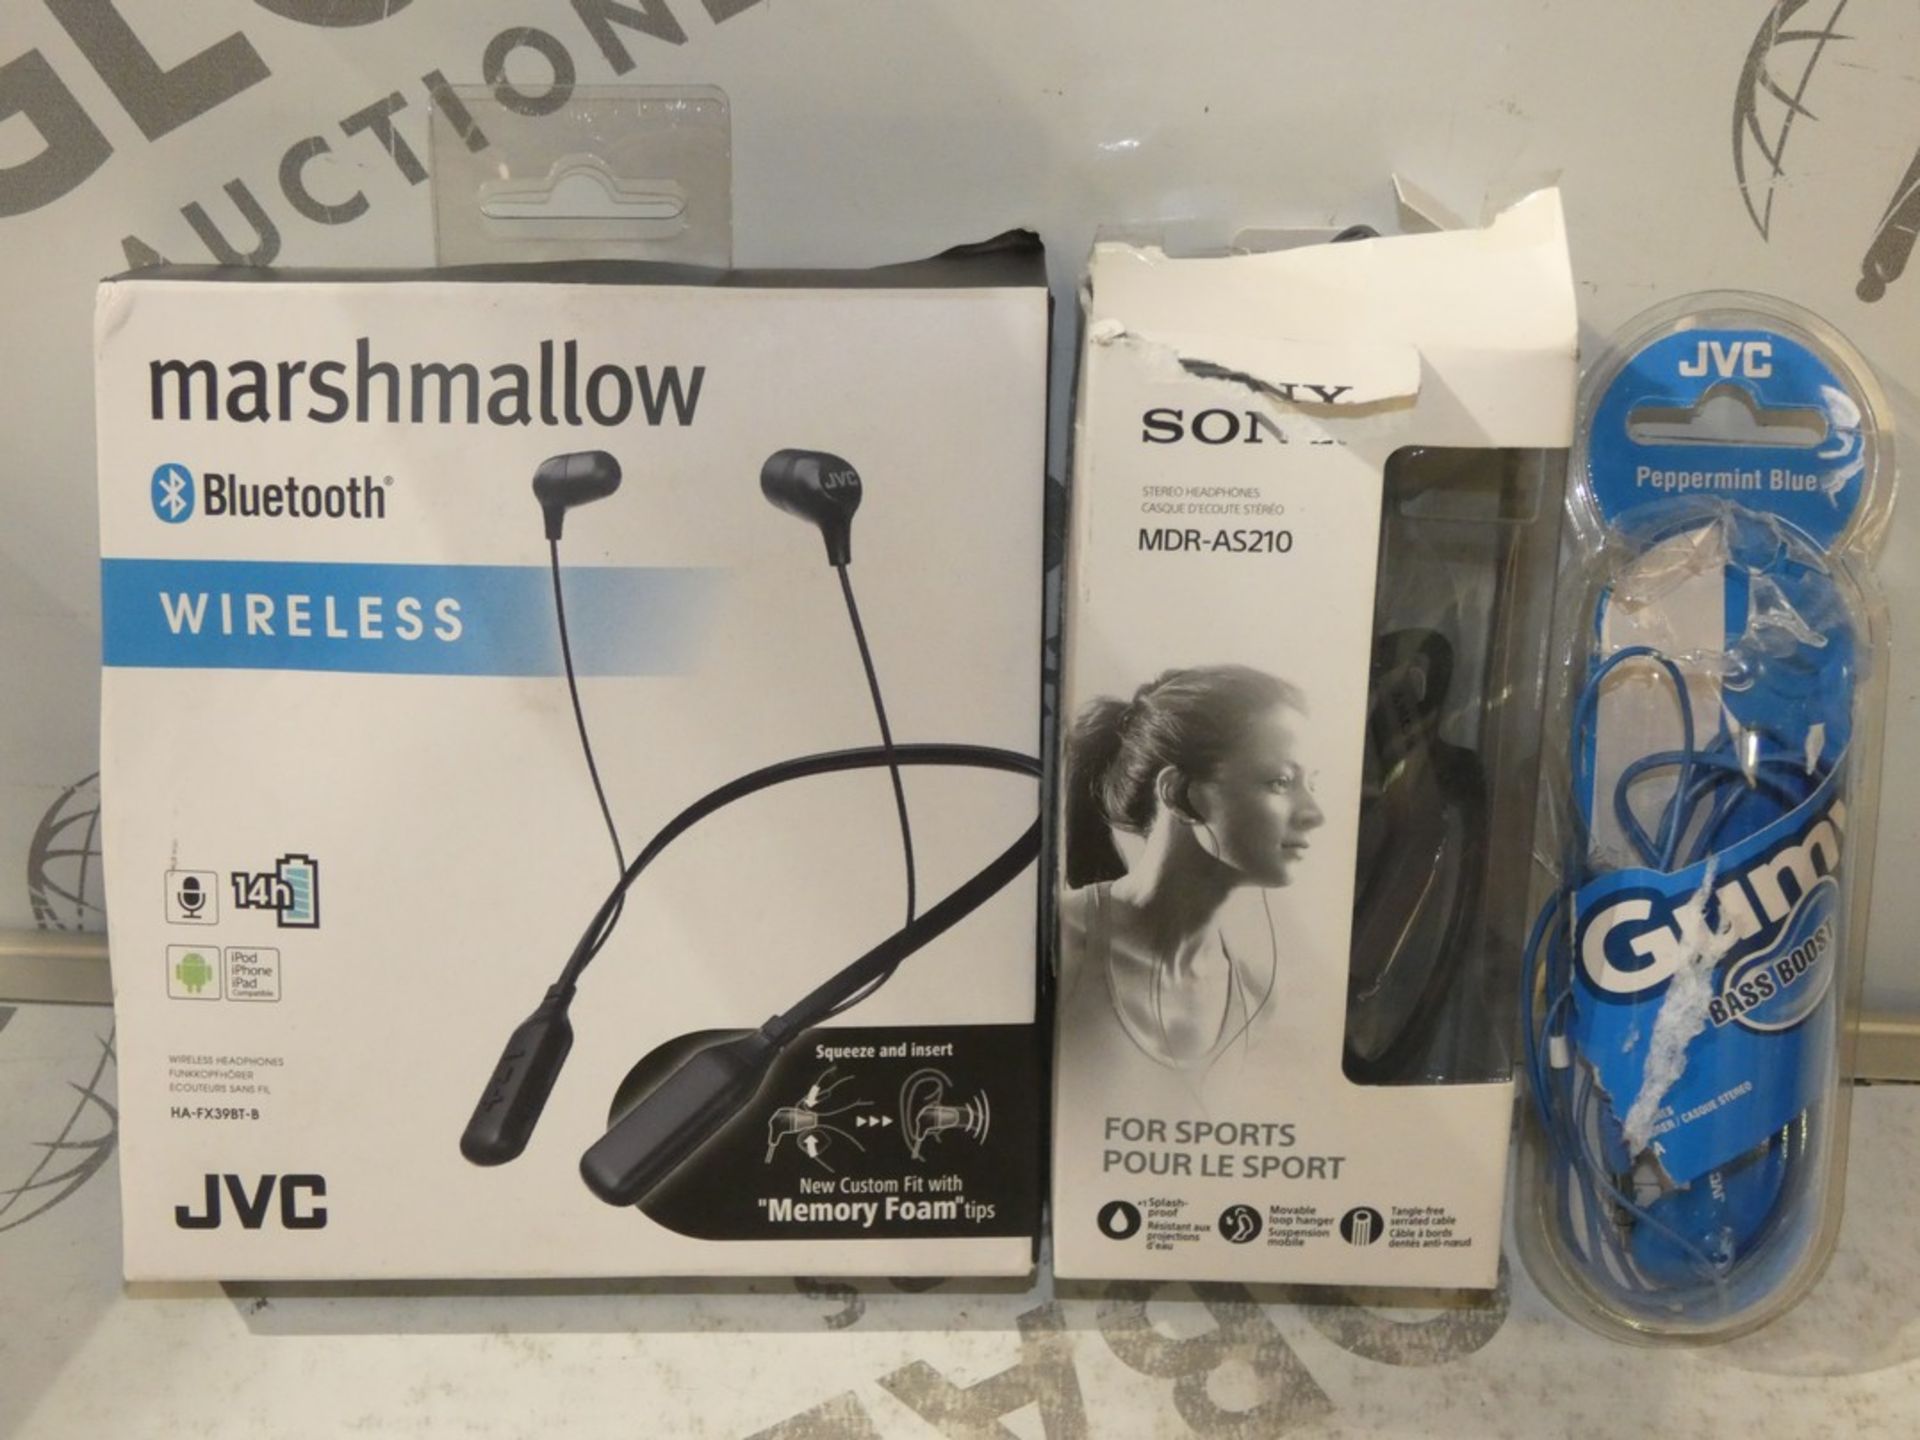 Lot to Contain 5 Assorted Pairs Of JVC And Sony Earbuds And Earphones (To Be Handed Out By Staff